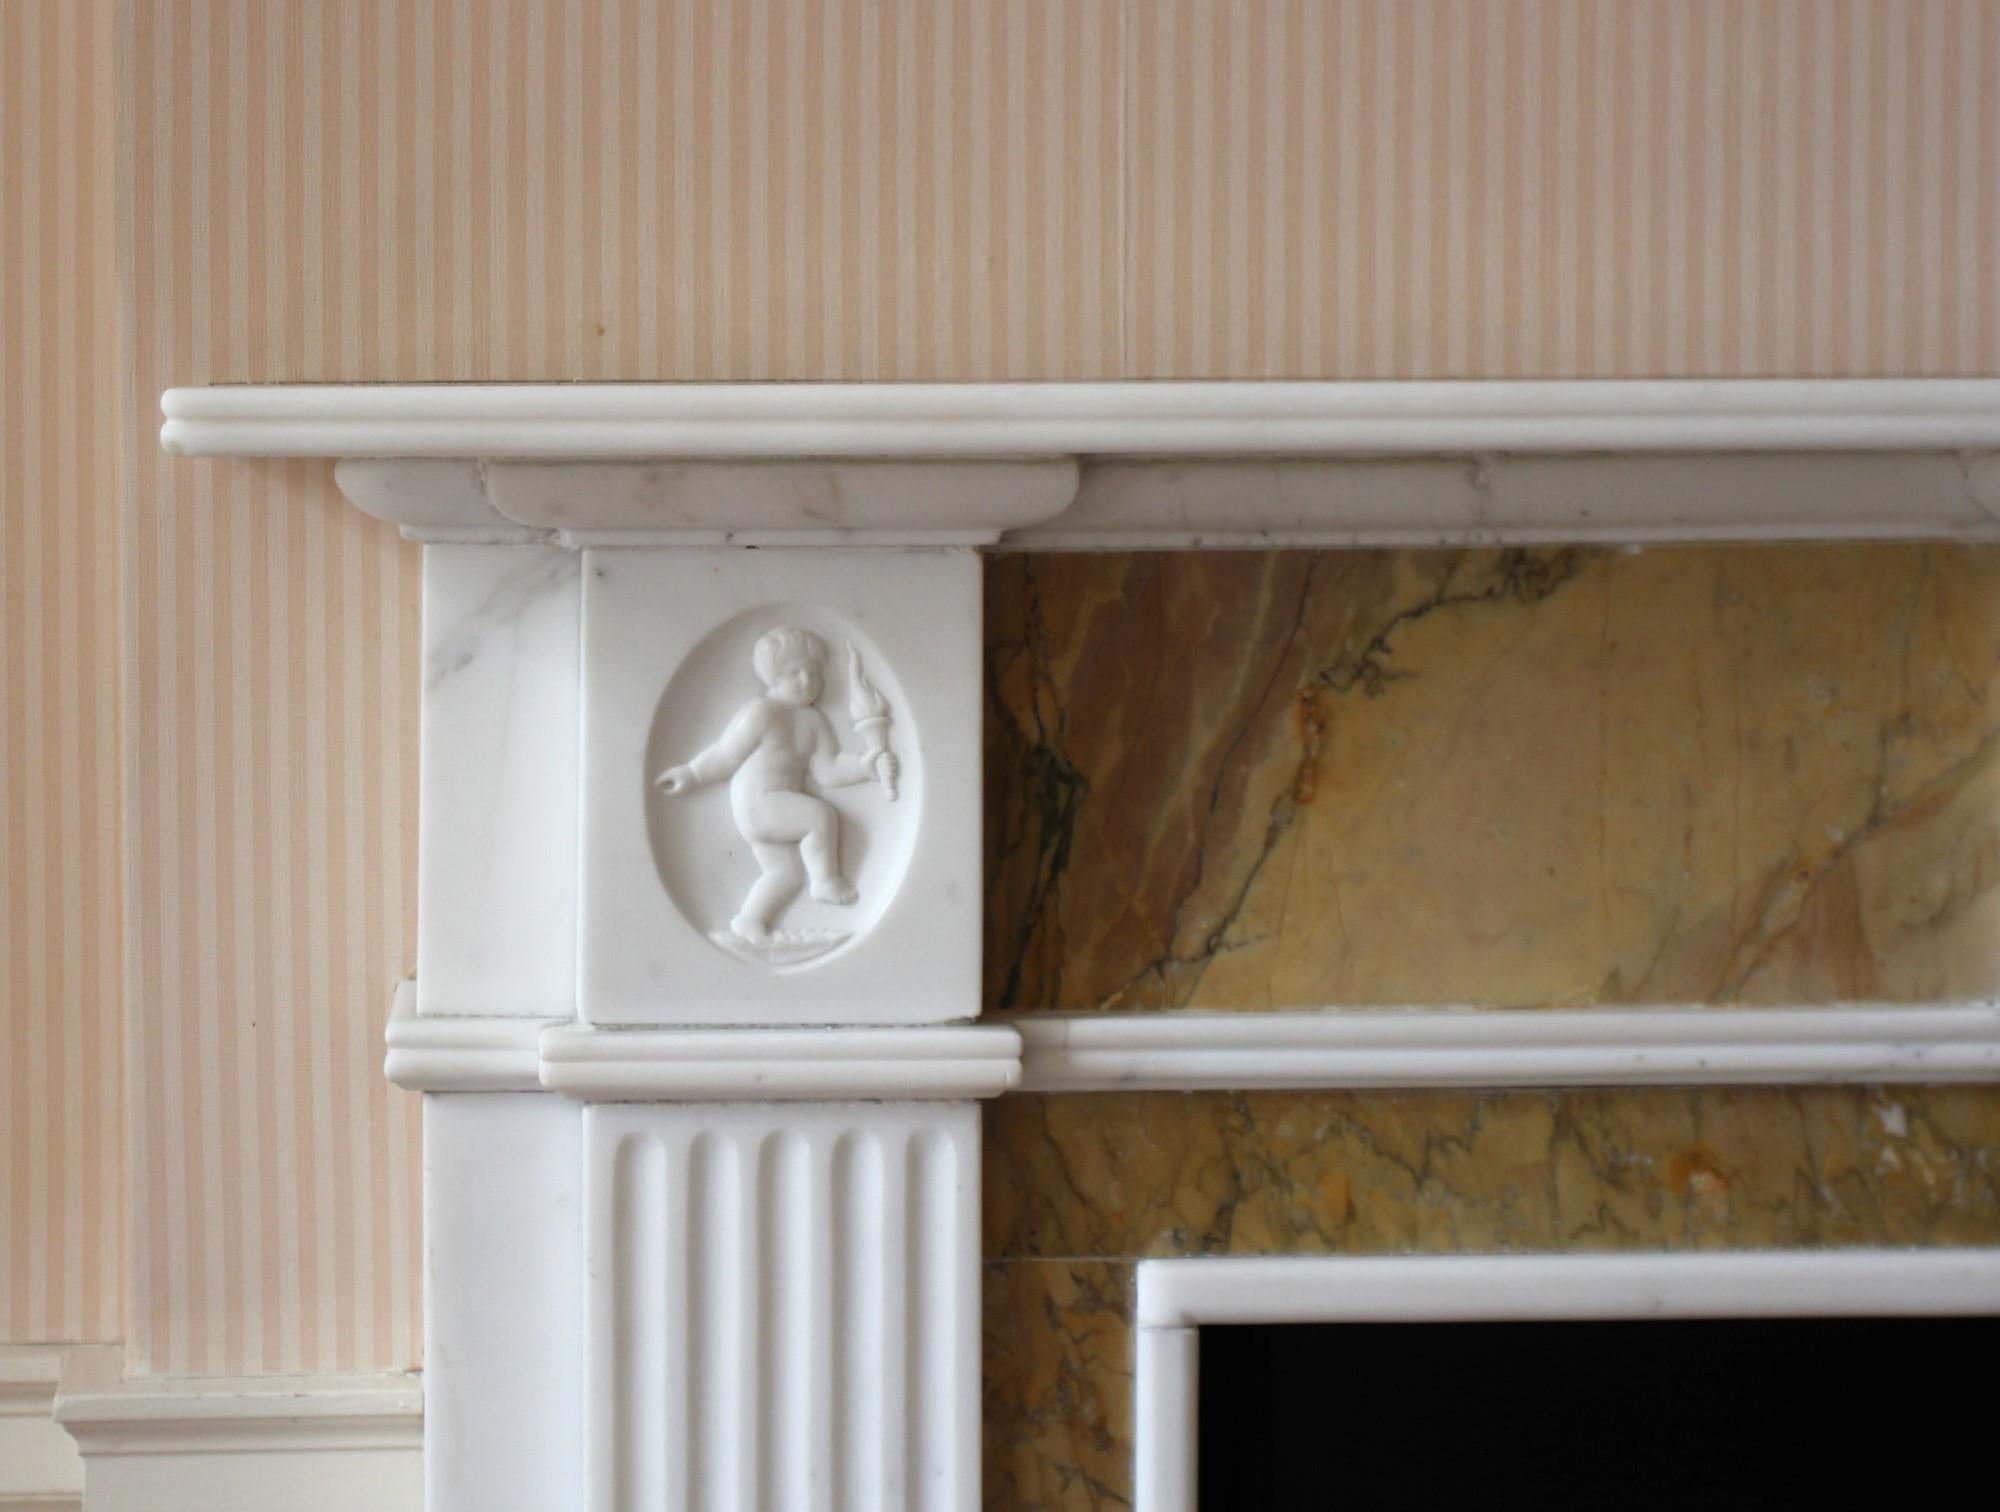 Neoclassical Revival 1931 NYC Waldorf Astoria Hotel English Marble Mantel with Figural Child Motif